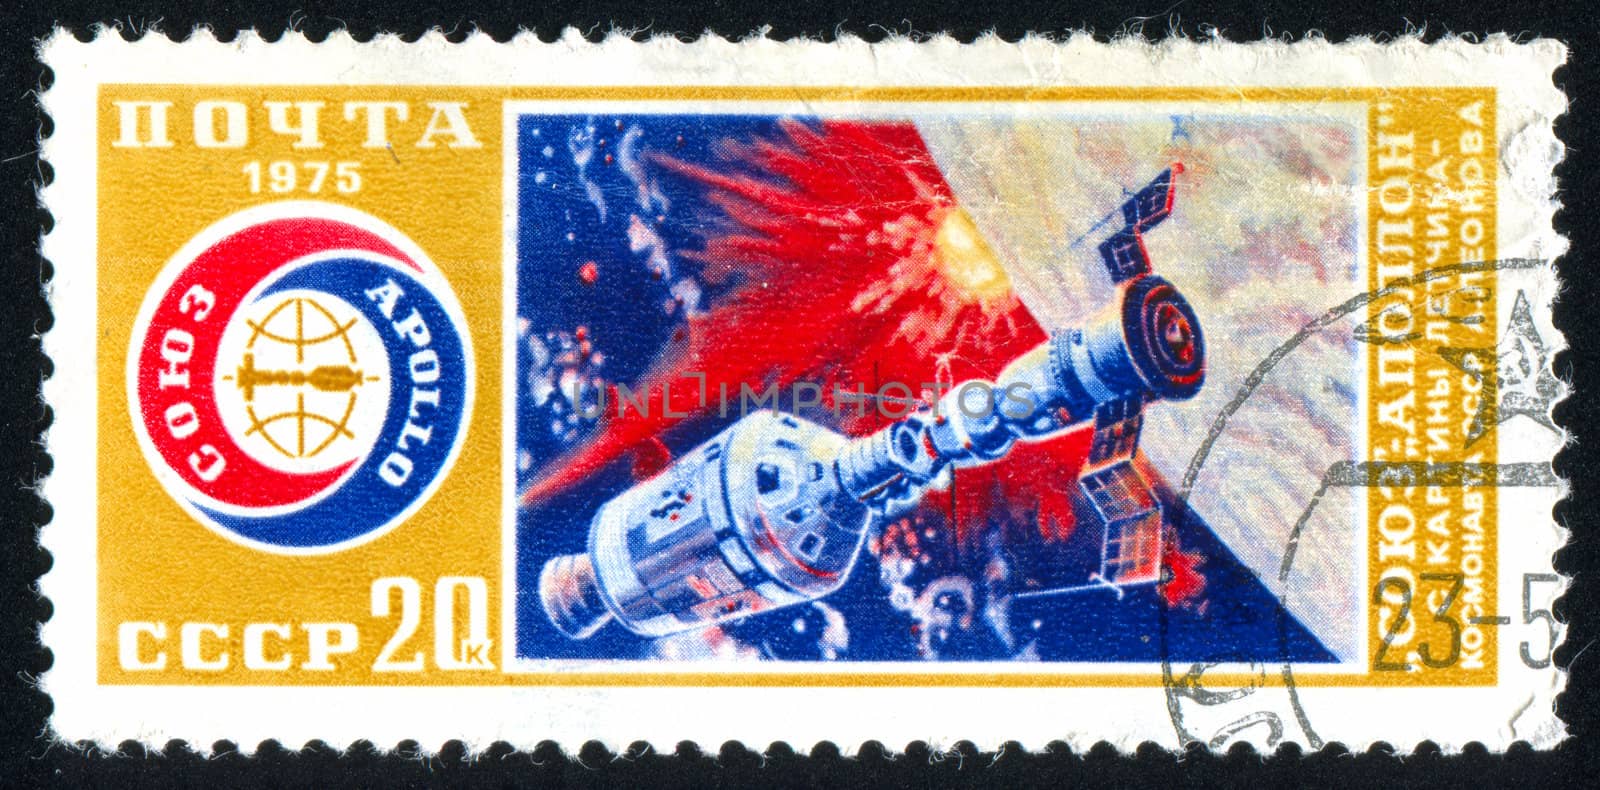 RUSSIA - CIRCA 1975: stamp printed by Russia, shows space satellite, circa 1975.